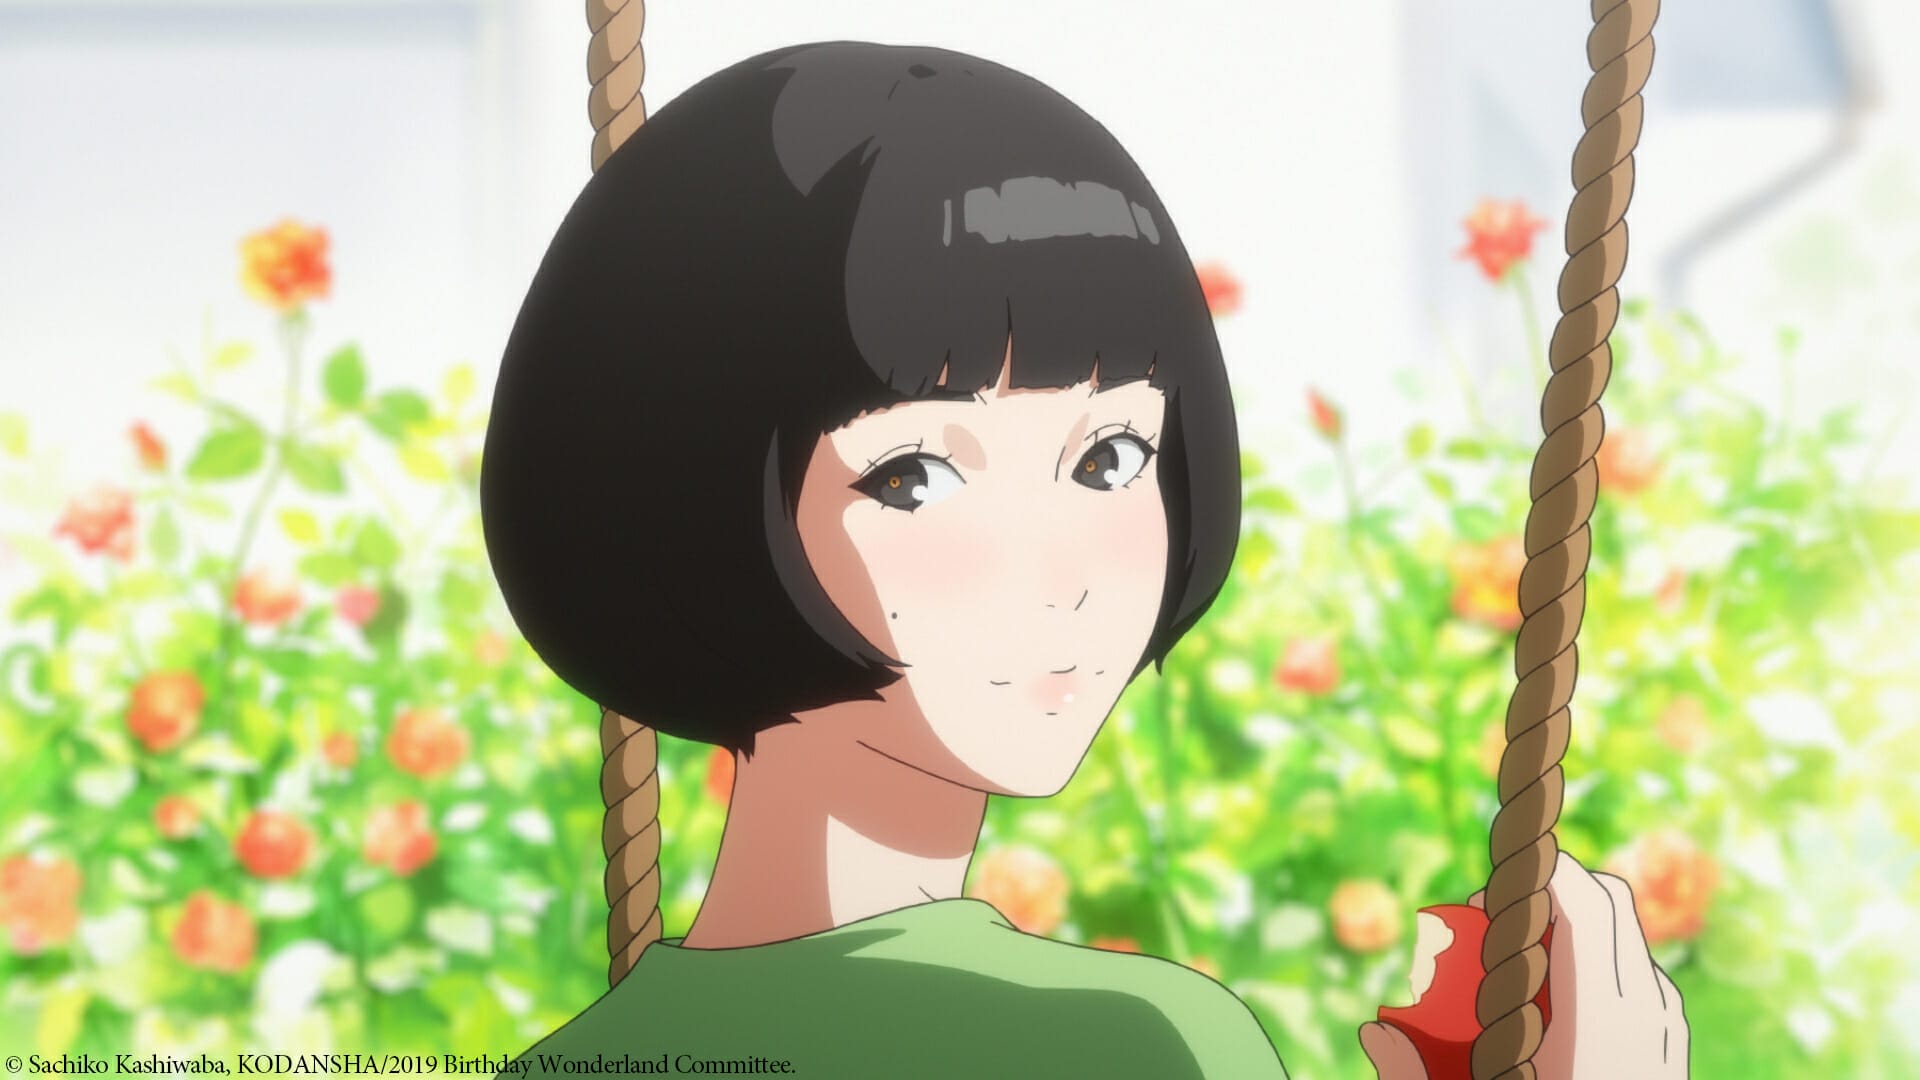 A woman with a bob haircut stands against a field of flowers. She's holding a broom.